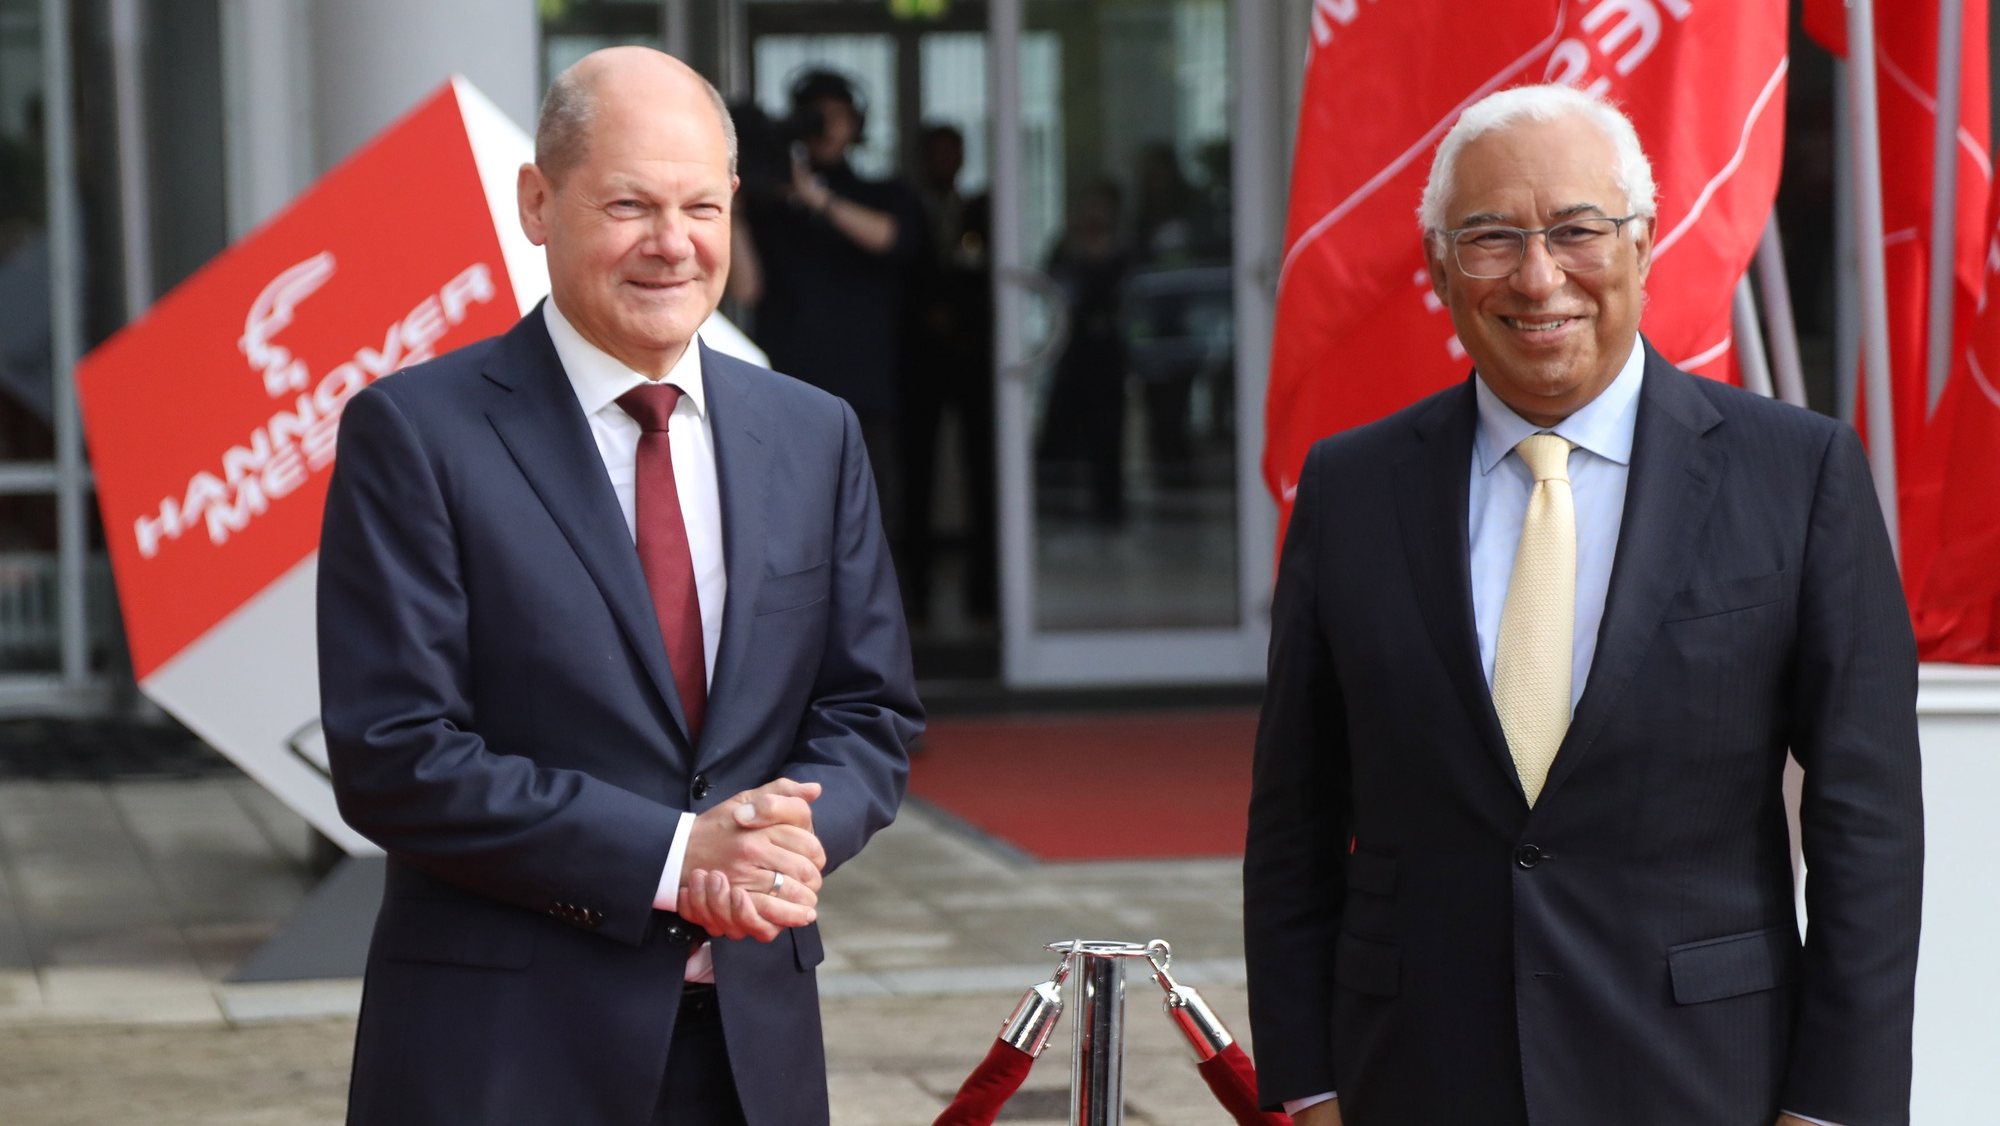 epa09985066 German Chancellor Olaf Scholz (L) meets Portuguese Prime Minister Antonio Costa (R) before the opening ceremony of the Hannover Industry fair (Hannover Messe) in Hanover, Germany, 29 May 2022. About 2,500 exhibitors are expected for the fair which opens on 30 May. Partner country in 2022 is Portugal.  EPA/FOCKE STRANGMANN